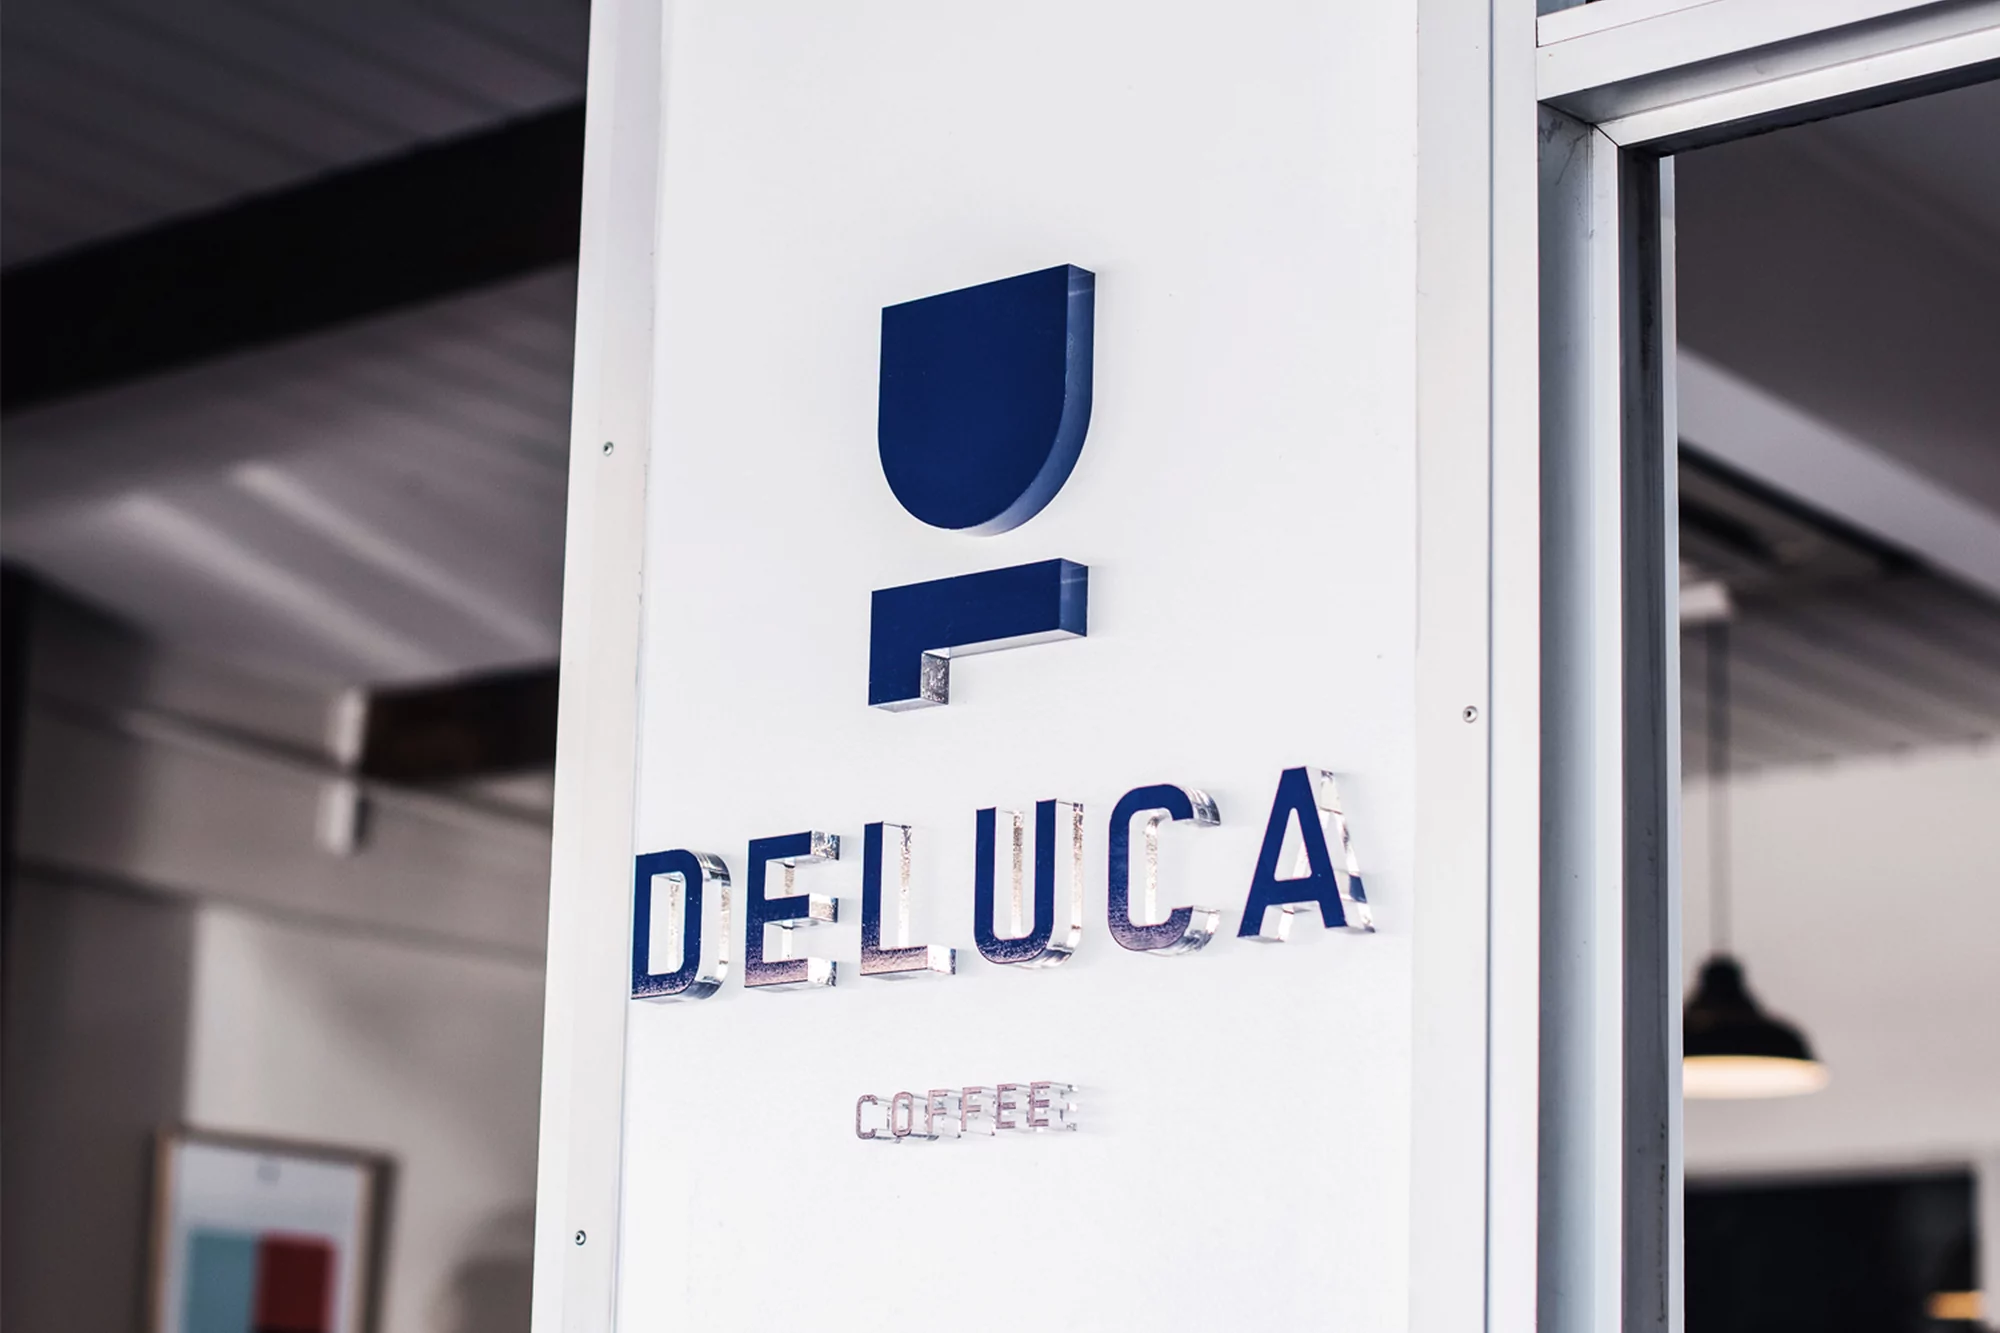 Deluca Coffee by Christopher Doyle & Co.